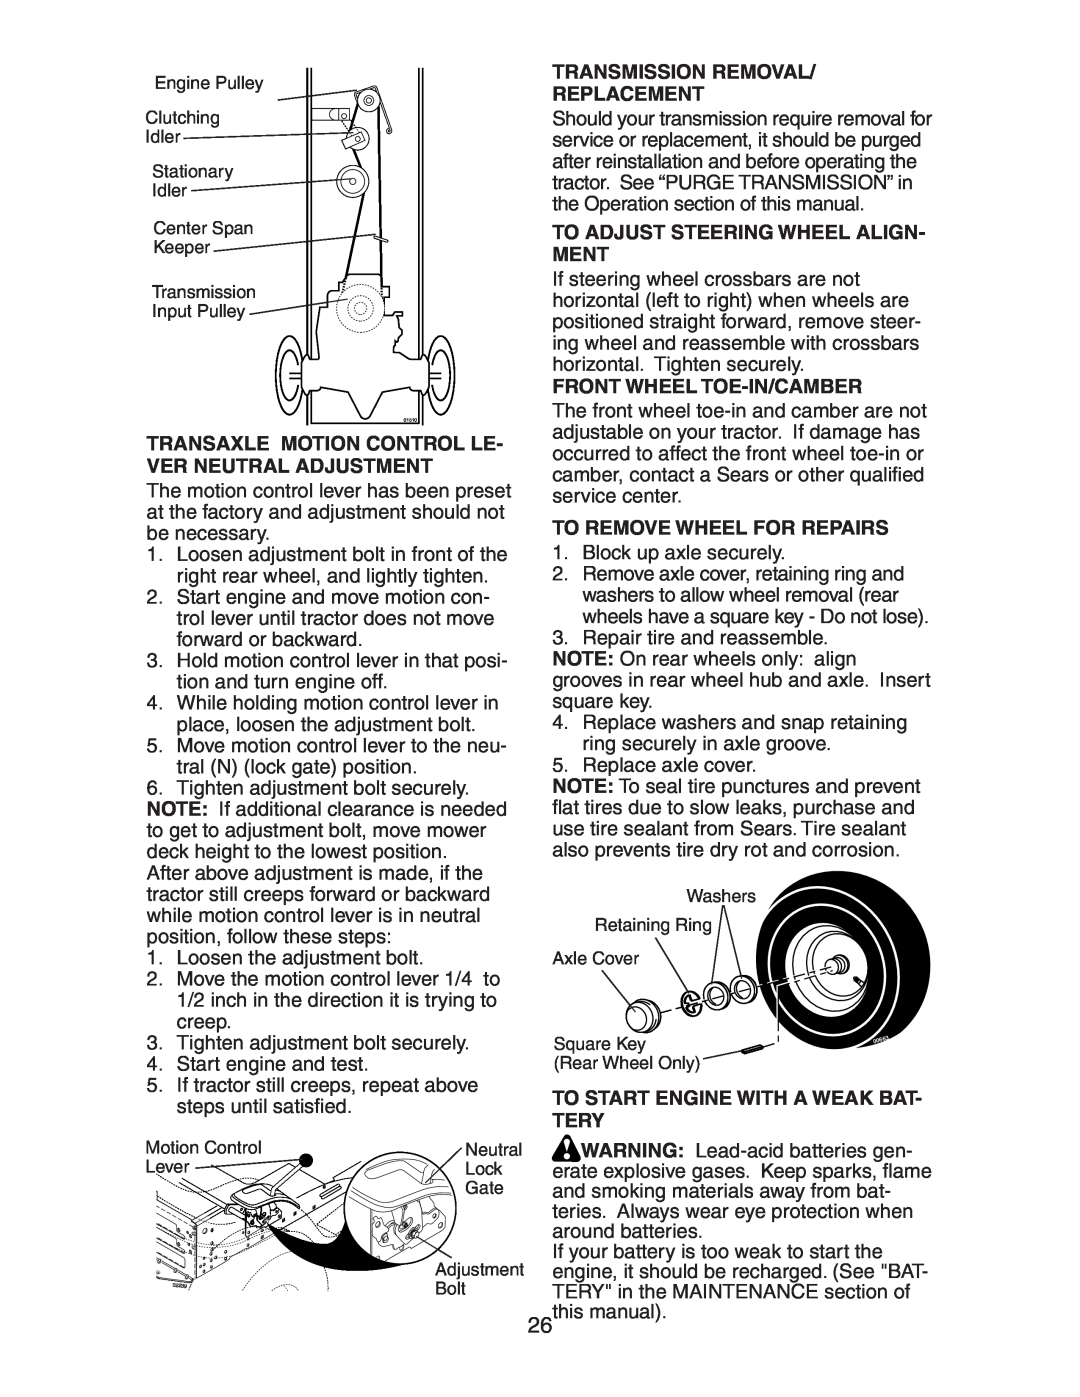 Craftsman 917.27582 owner manual Transmission Removal Replacement, Transaxle Motion Control Le- Ver Neutral Adjustment 